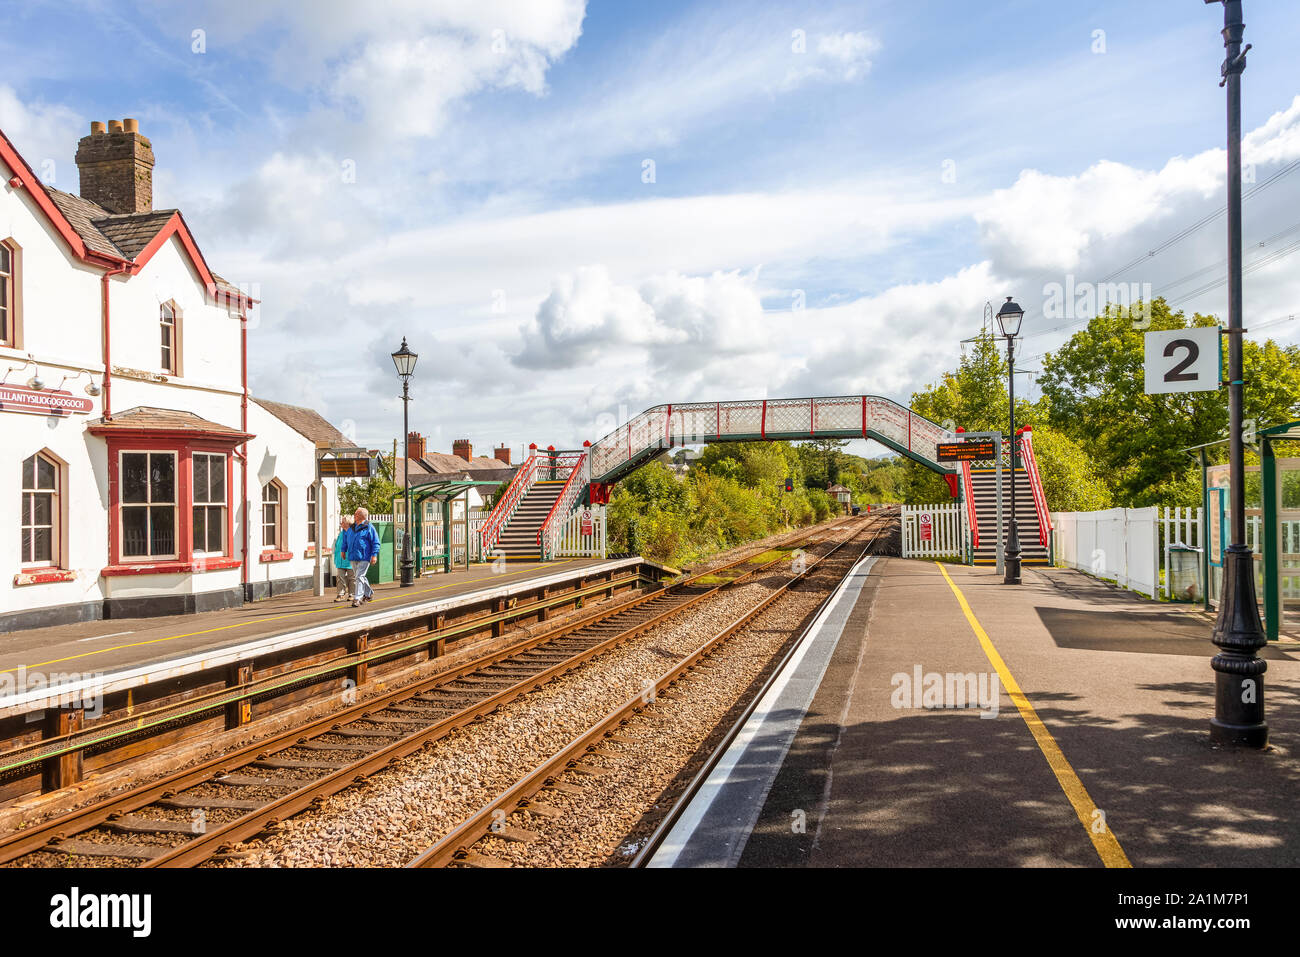 Station building and footbridge at  Llanfairpwllgwyngyll, in Wales known to have the longest place name in the UK. A blue sky is overhead. Stock Photo